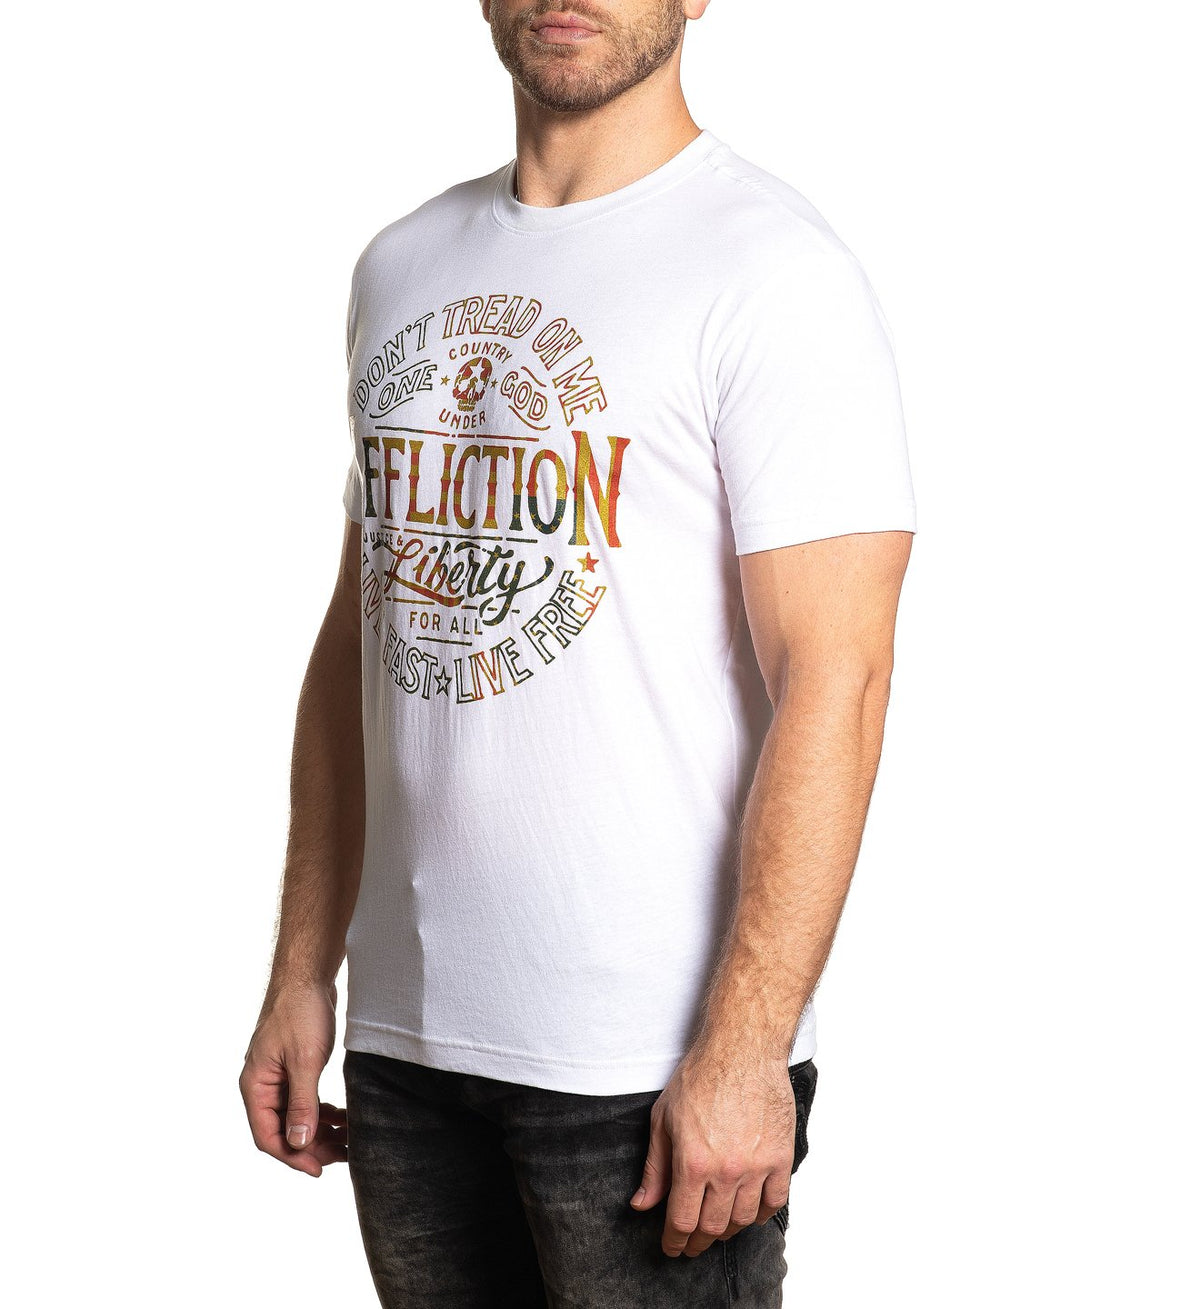 Liberty For All - Affliction Clothing